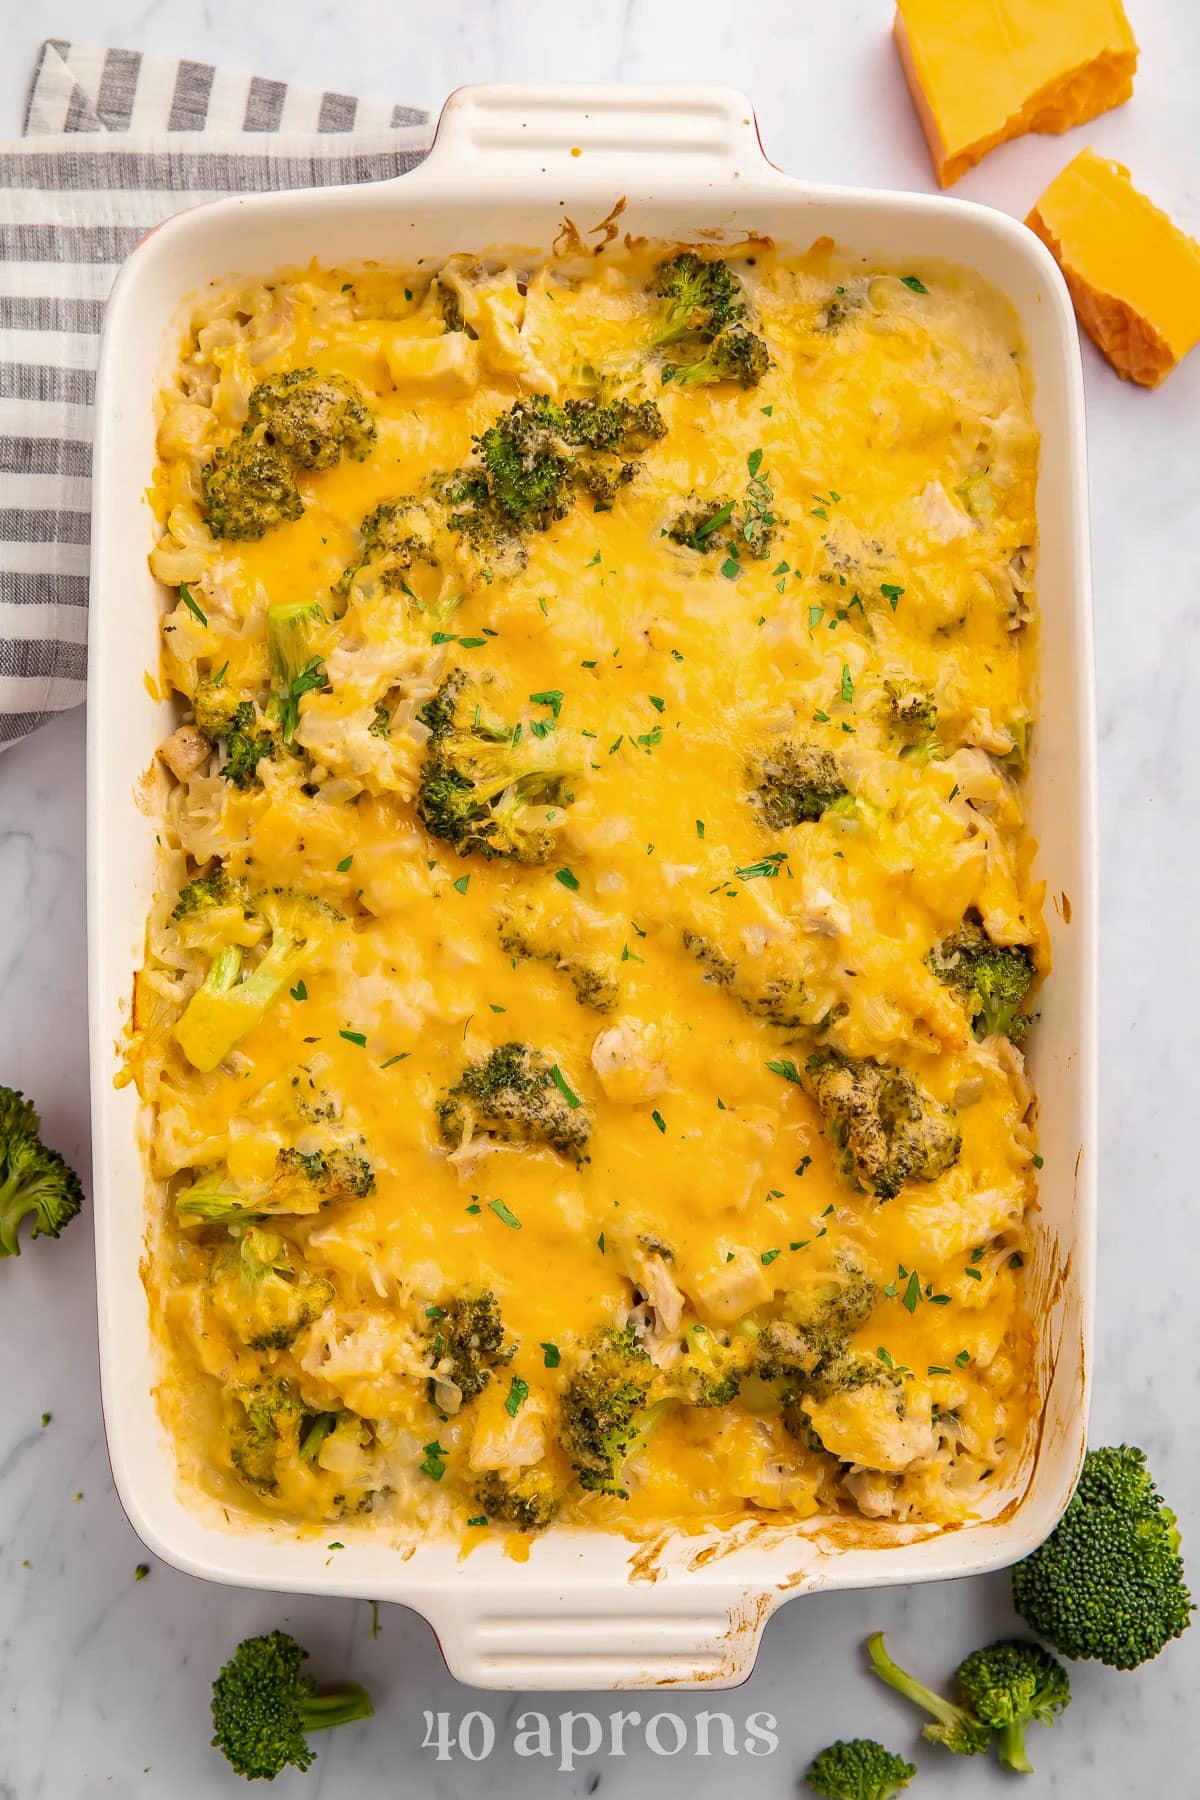 A large rectangular white casserole dish holding a baked cheesy chicken broccoli rice casserole.